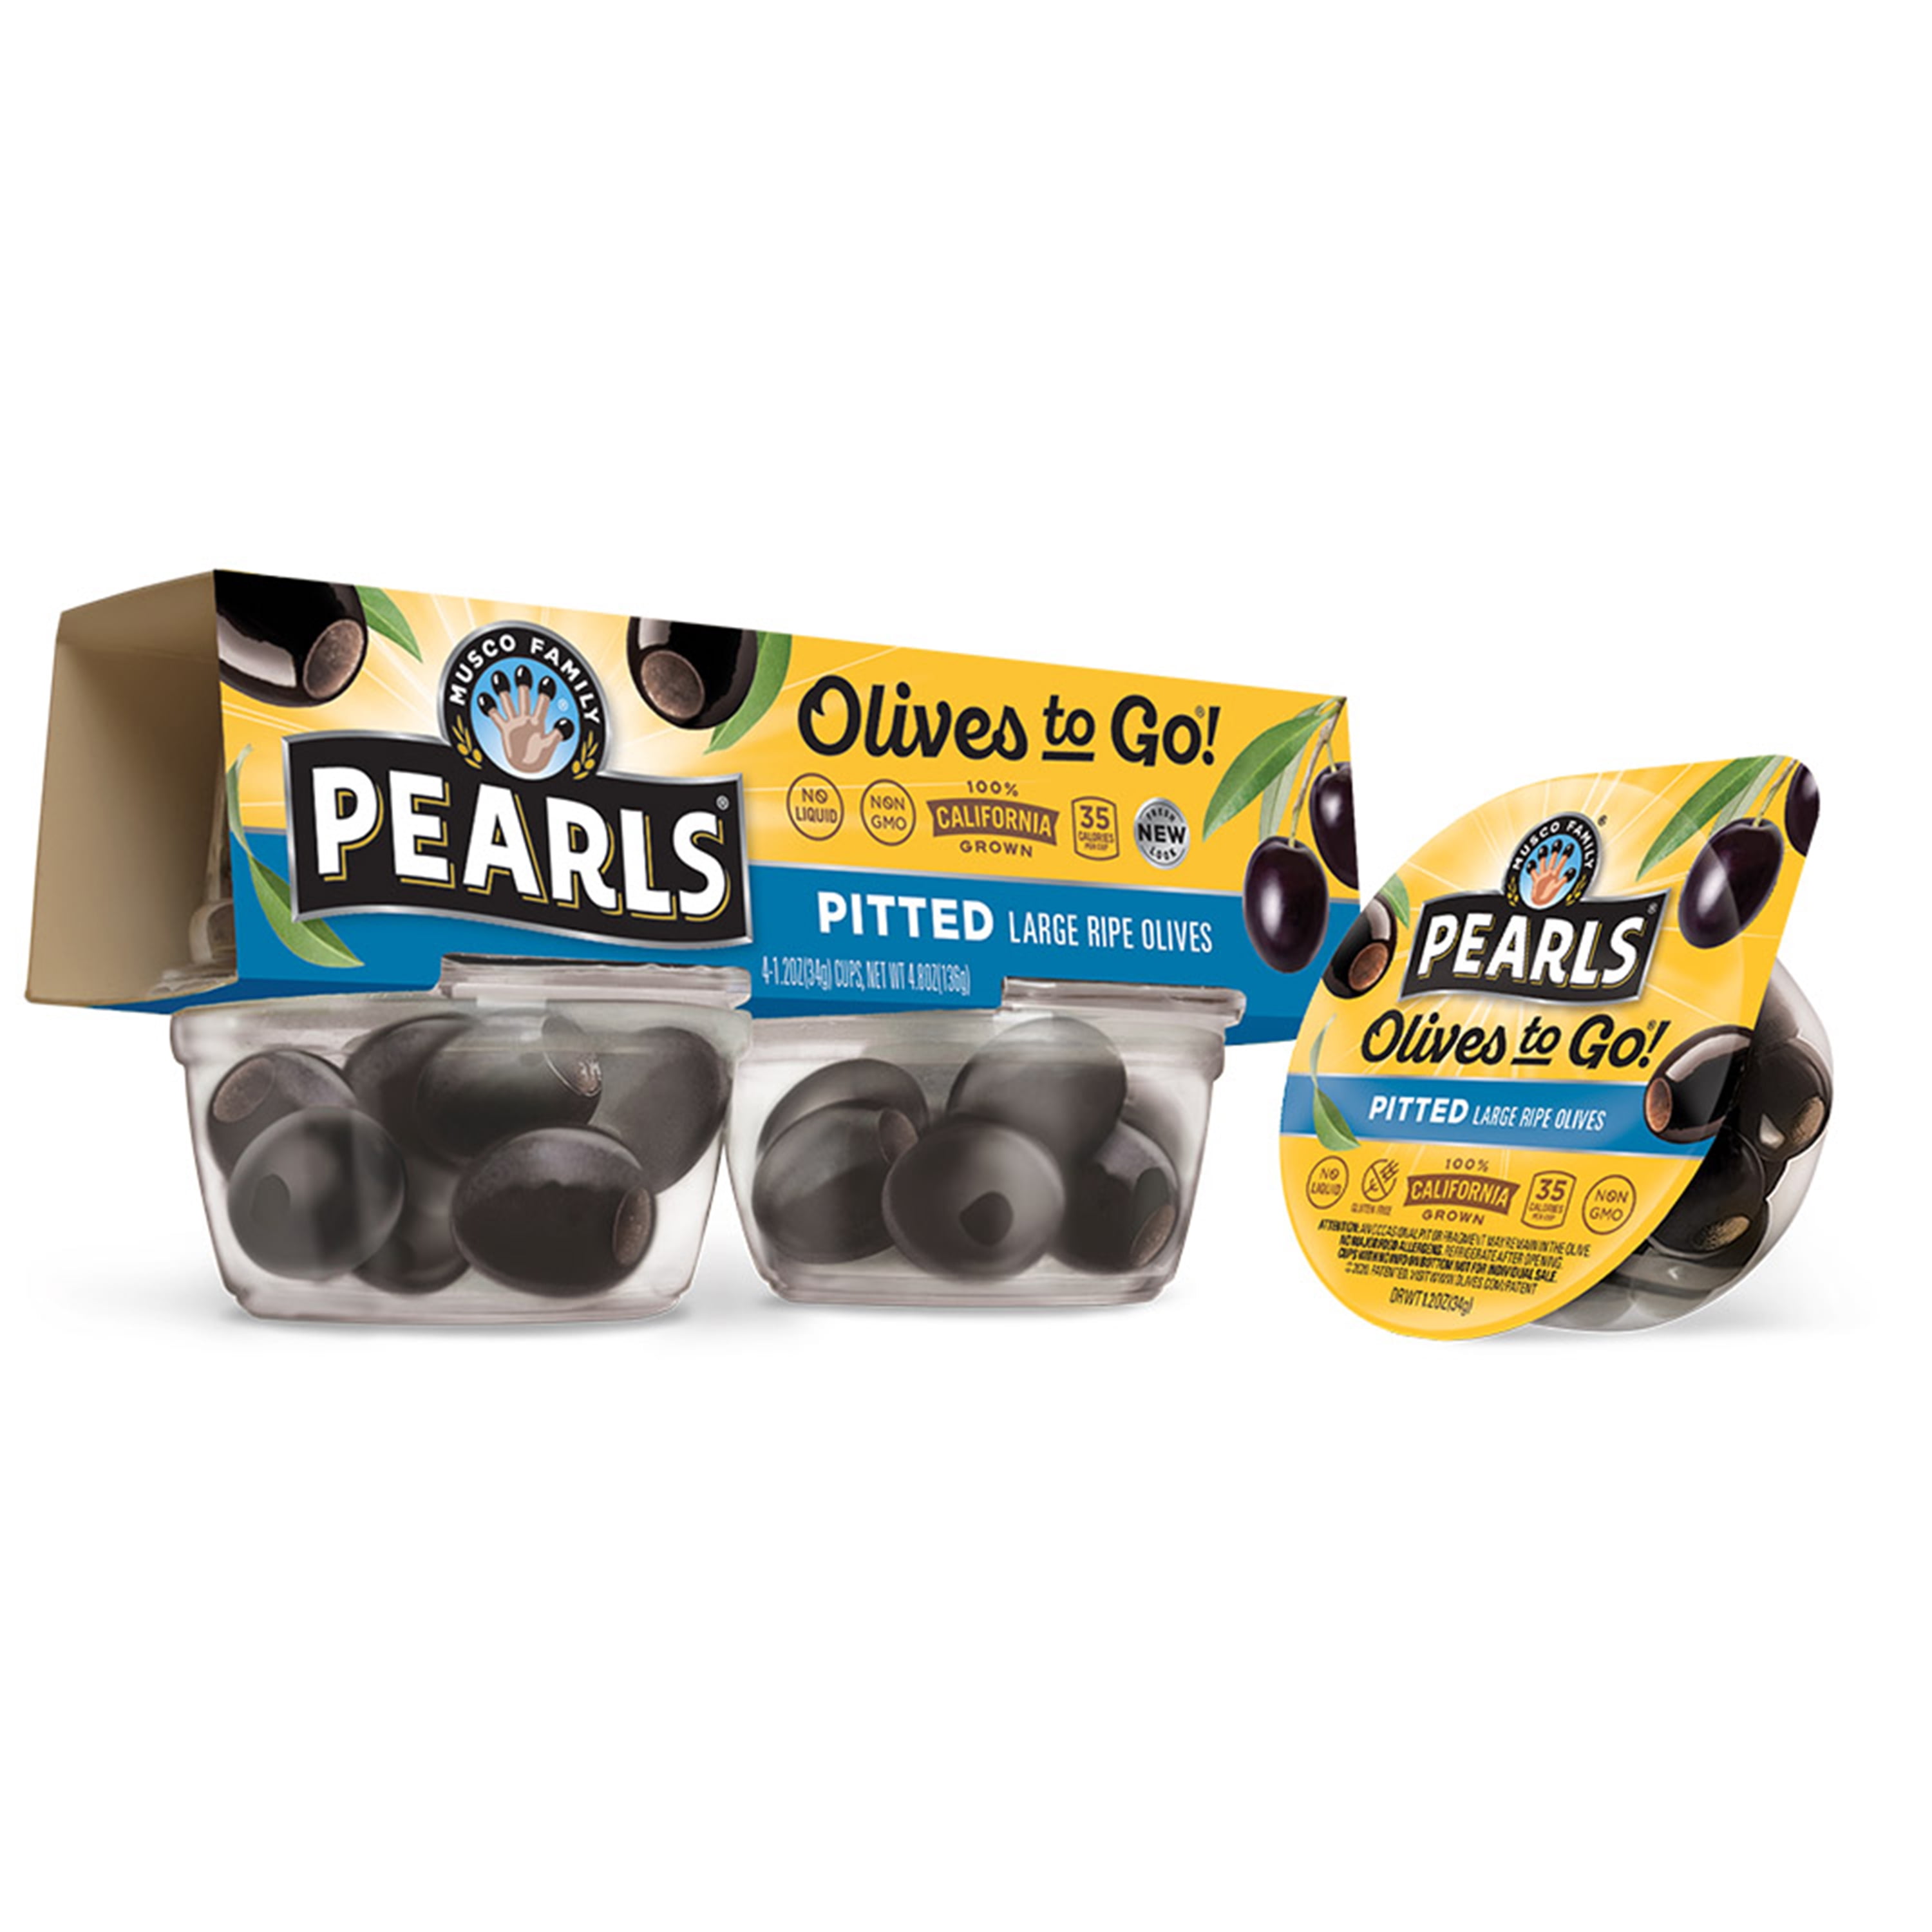 Pearls Black Pitted Large California Ripe Olives, 4 Pack, 1.2 oz